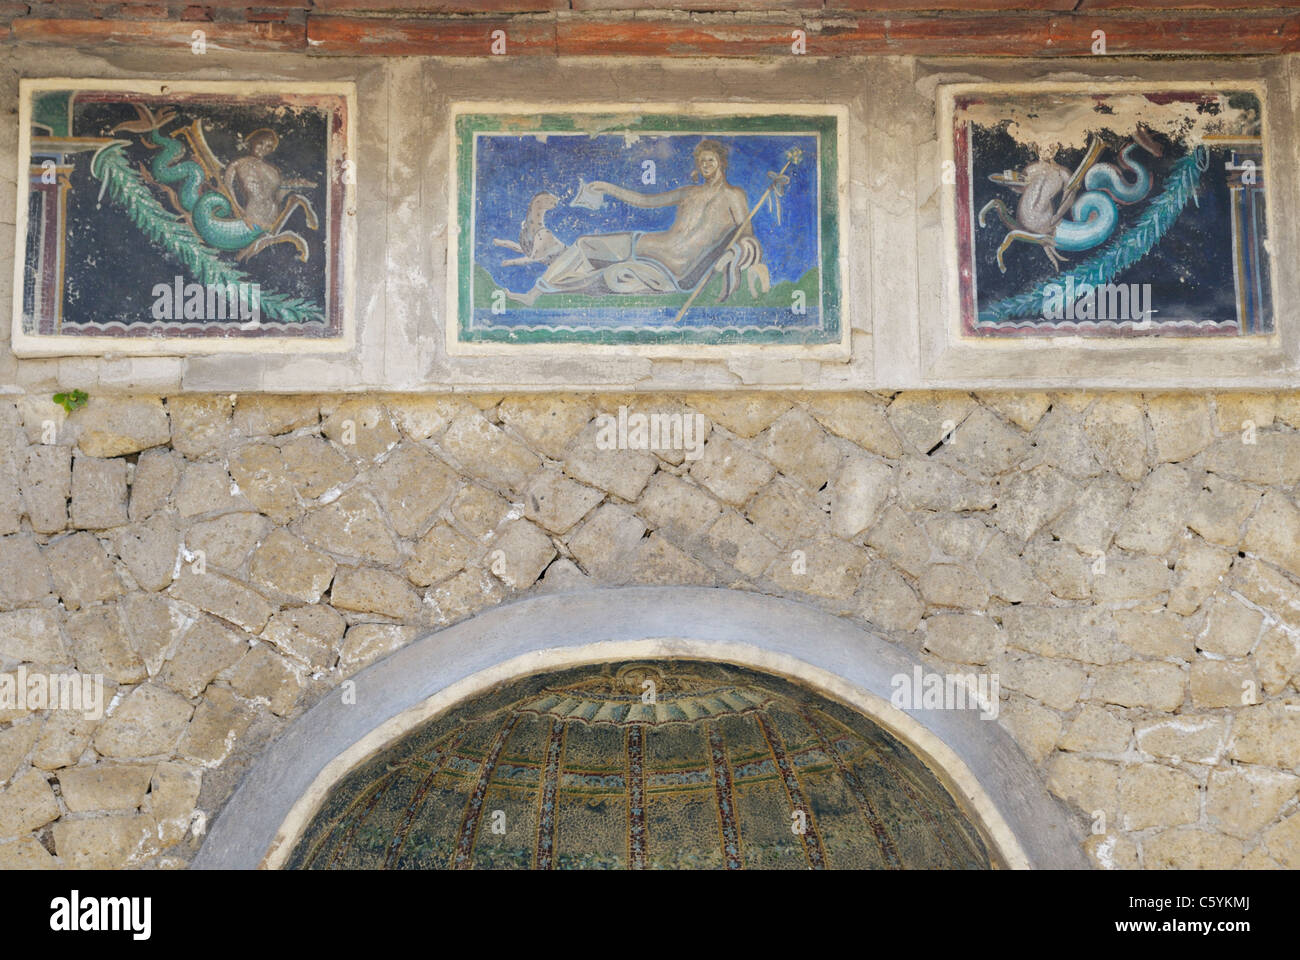 Nymphaeum with a frieze of mythological figures (3of 7 panels shown) , House of the Skeleton, Herculaneum Stock Photo